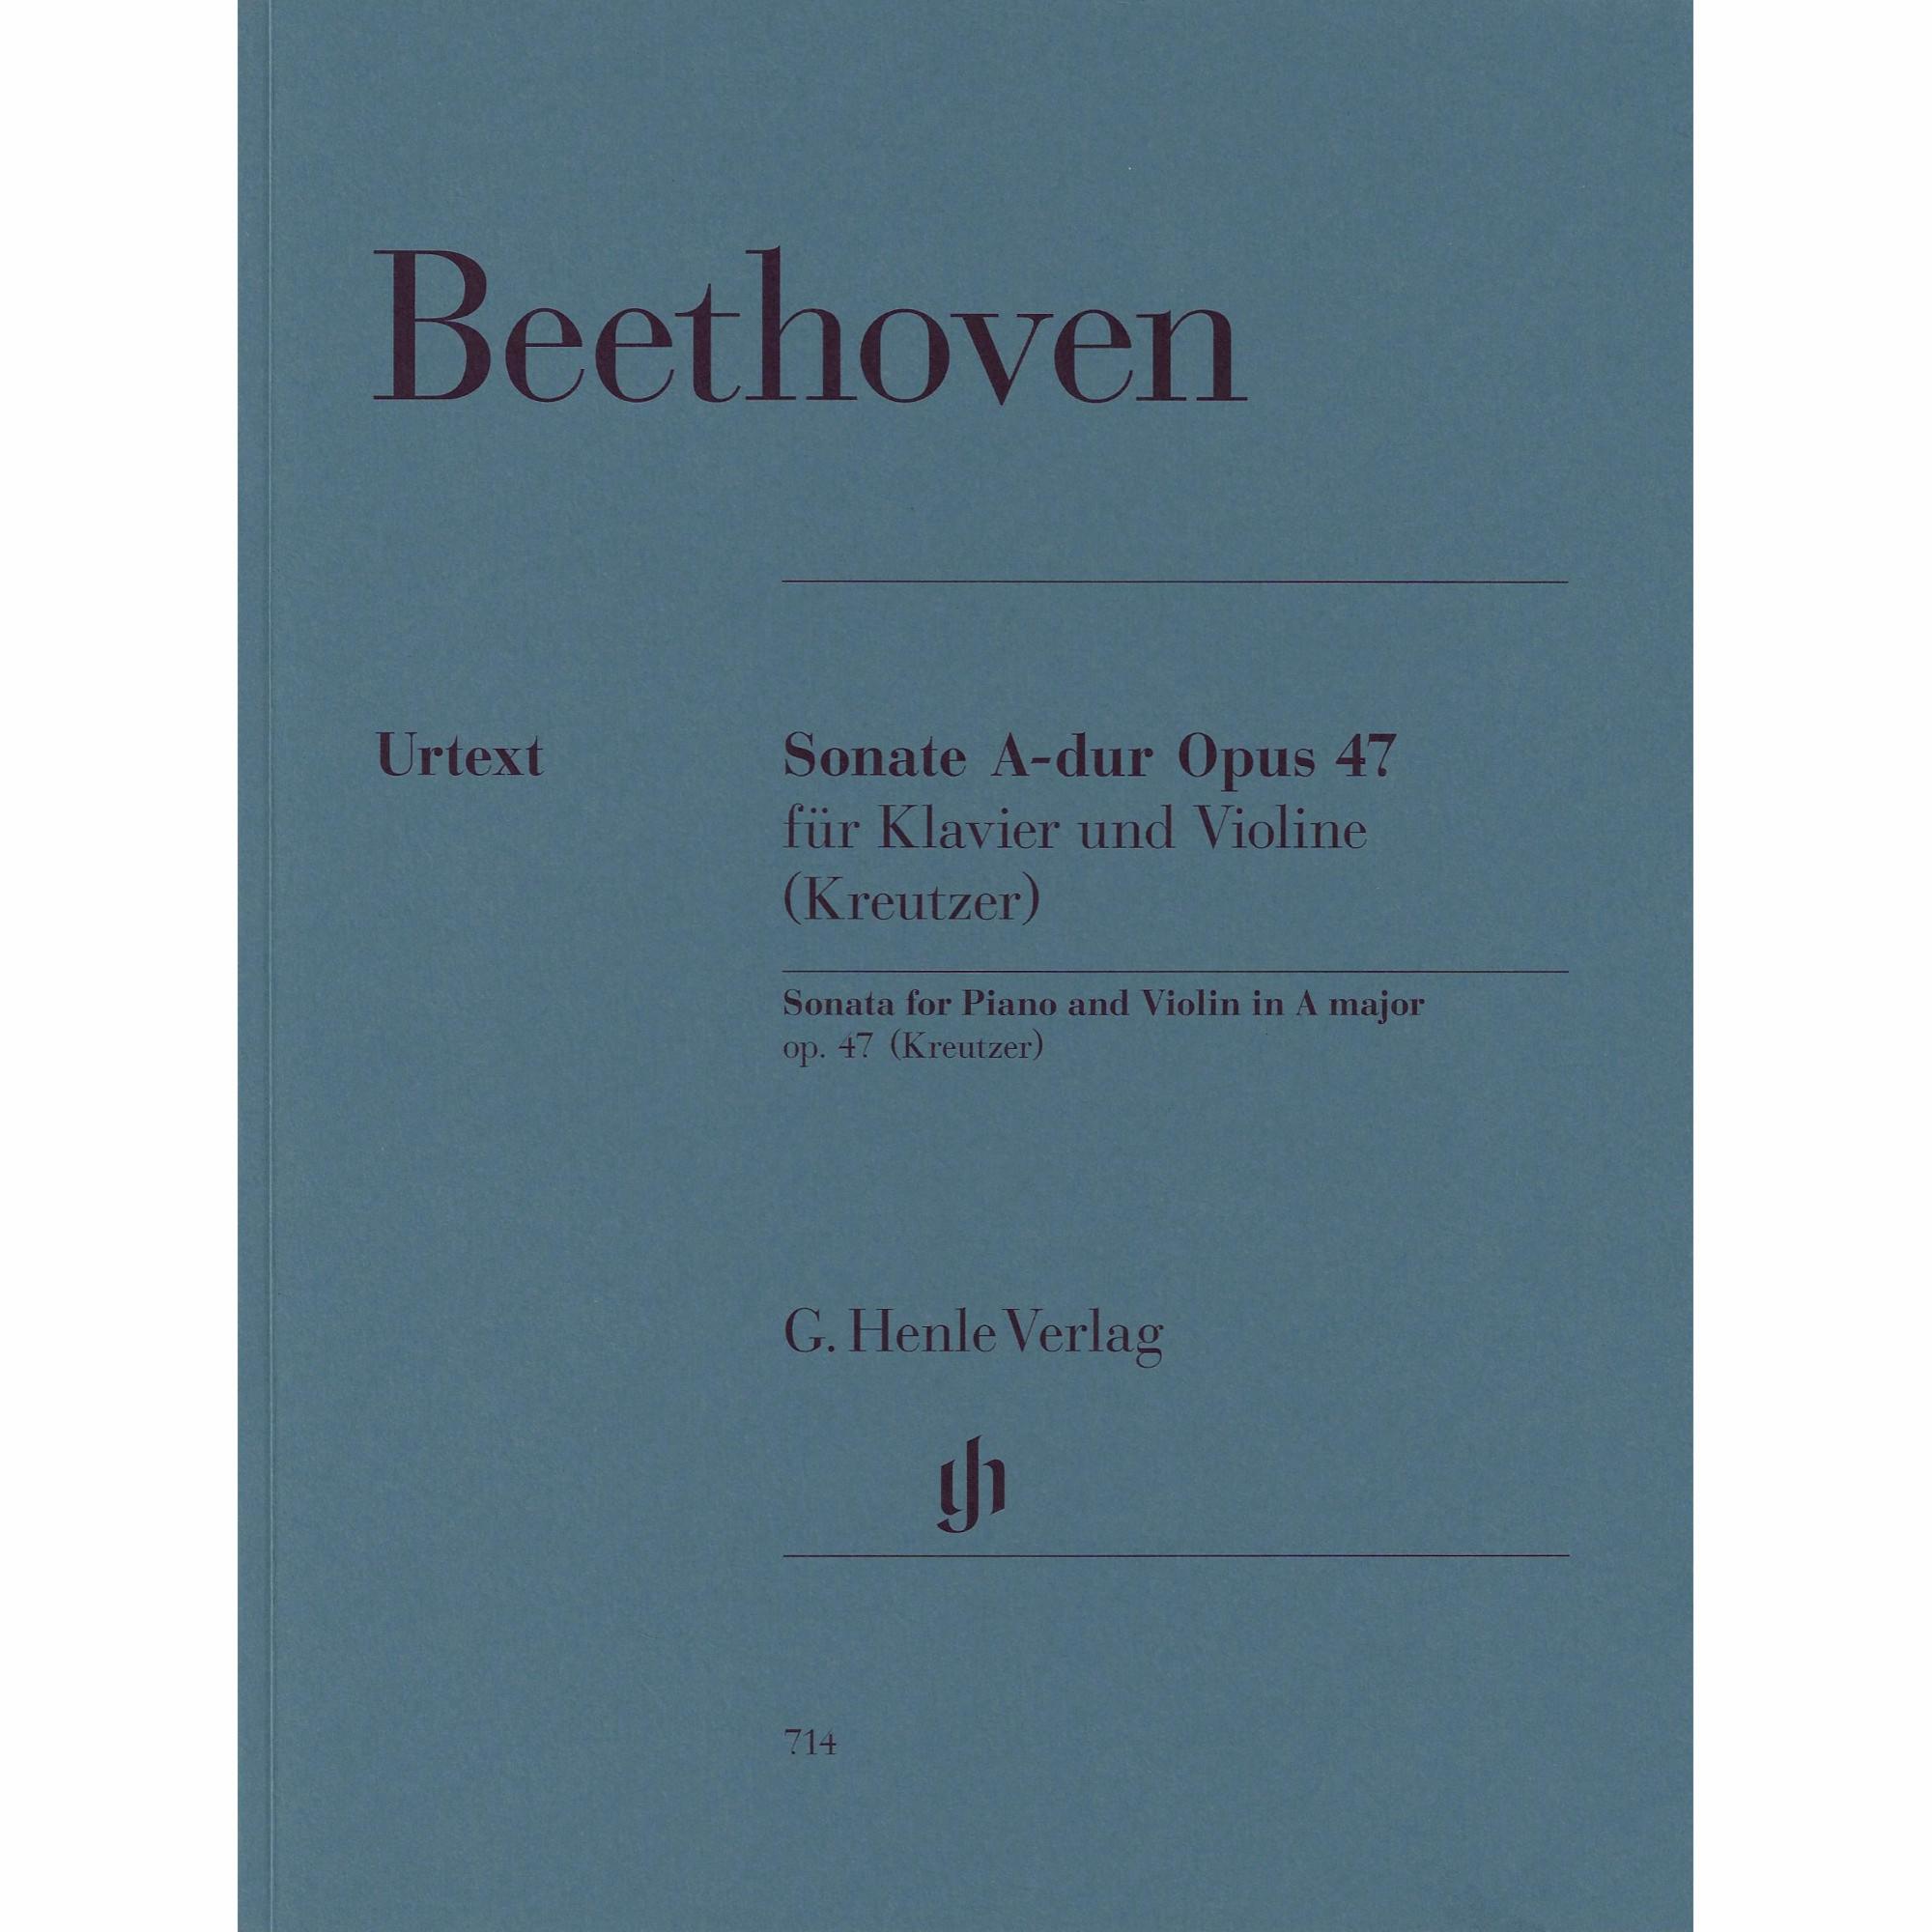 Beethoven -- Sonata in A Major, Op. 47 (Kreutzer) for Violin and Piano